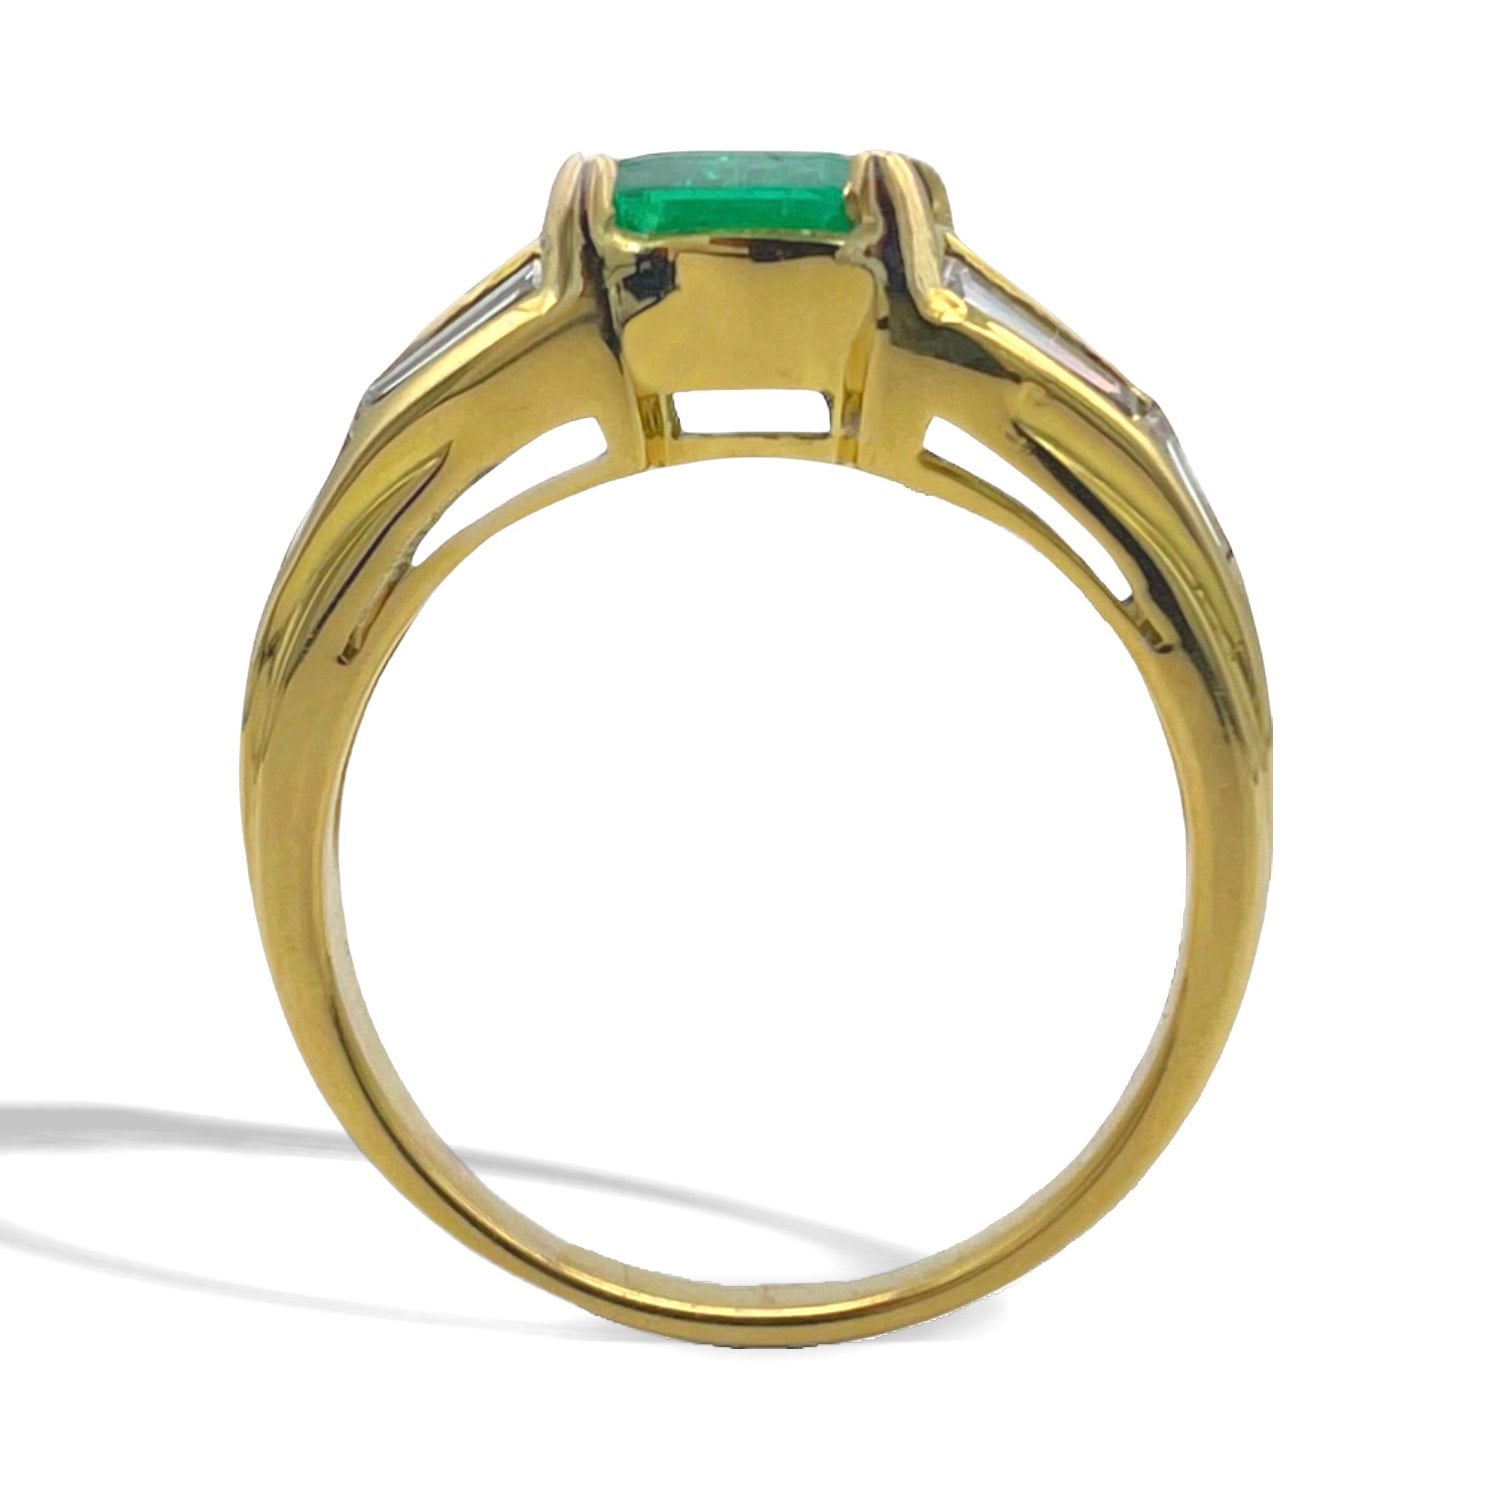 Natural Certified Green Colour Emerald / Panna Gemstone Ring For Unisex Her  | eBay